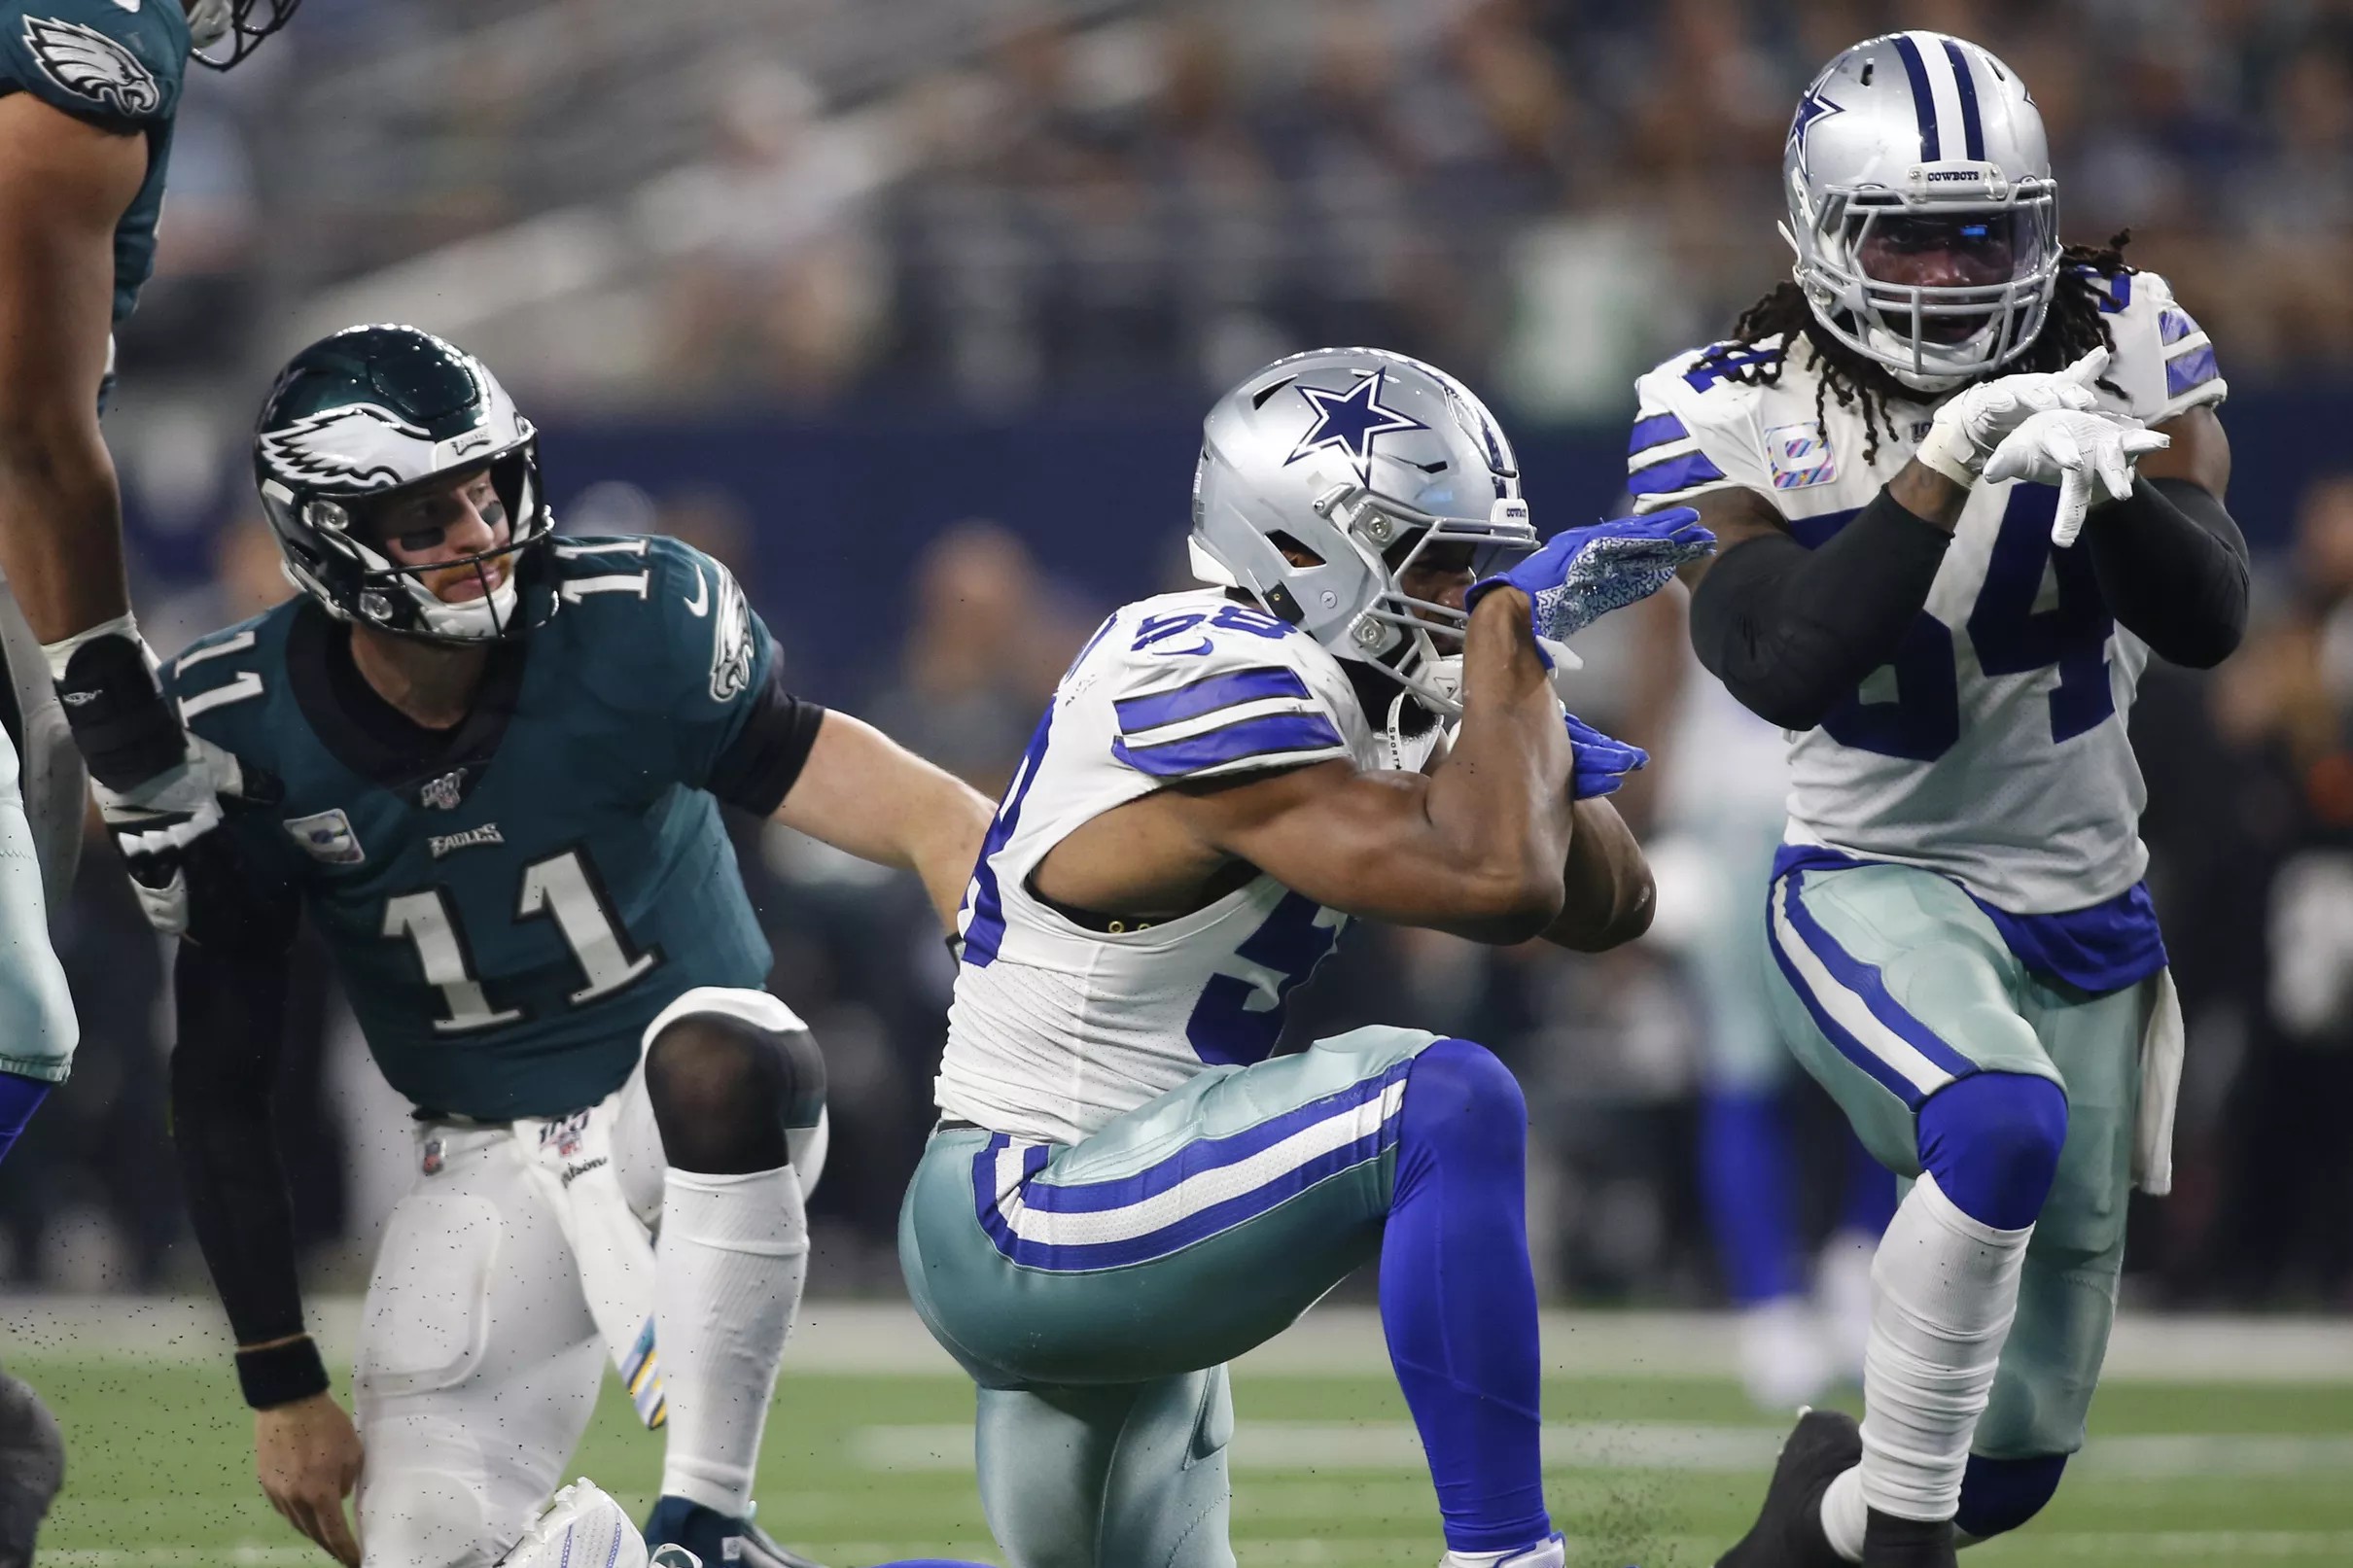 After further review: The Cowboys defense showed up against the Eagles